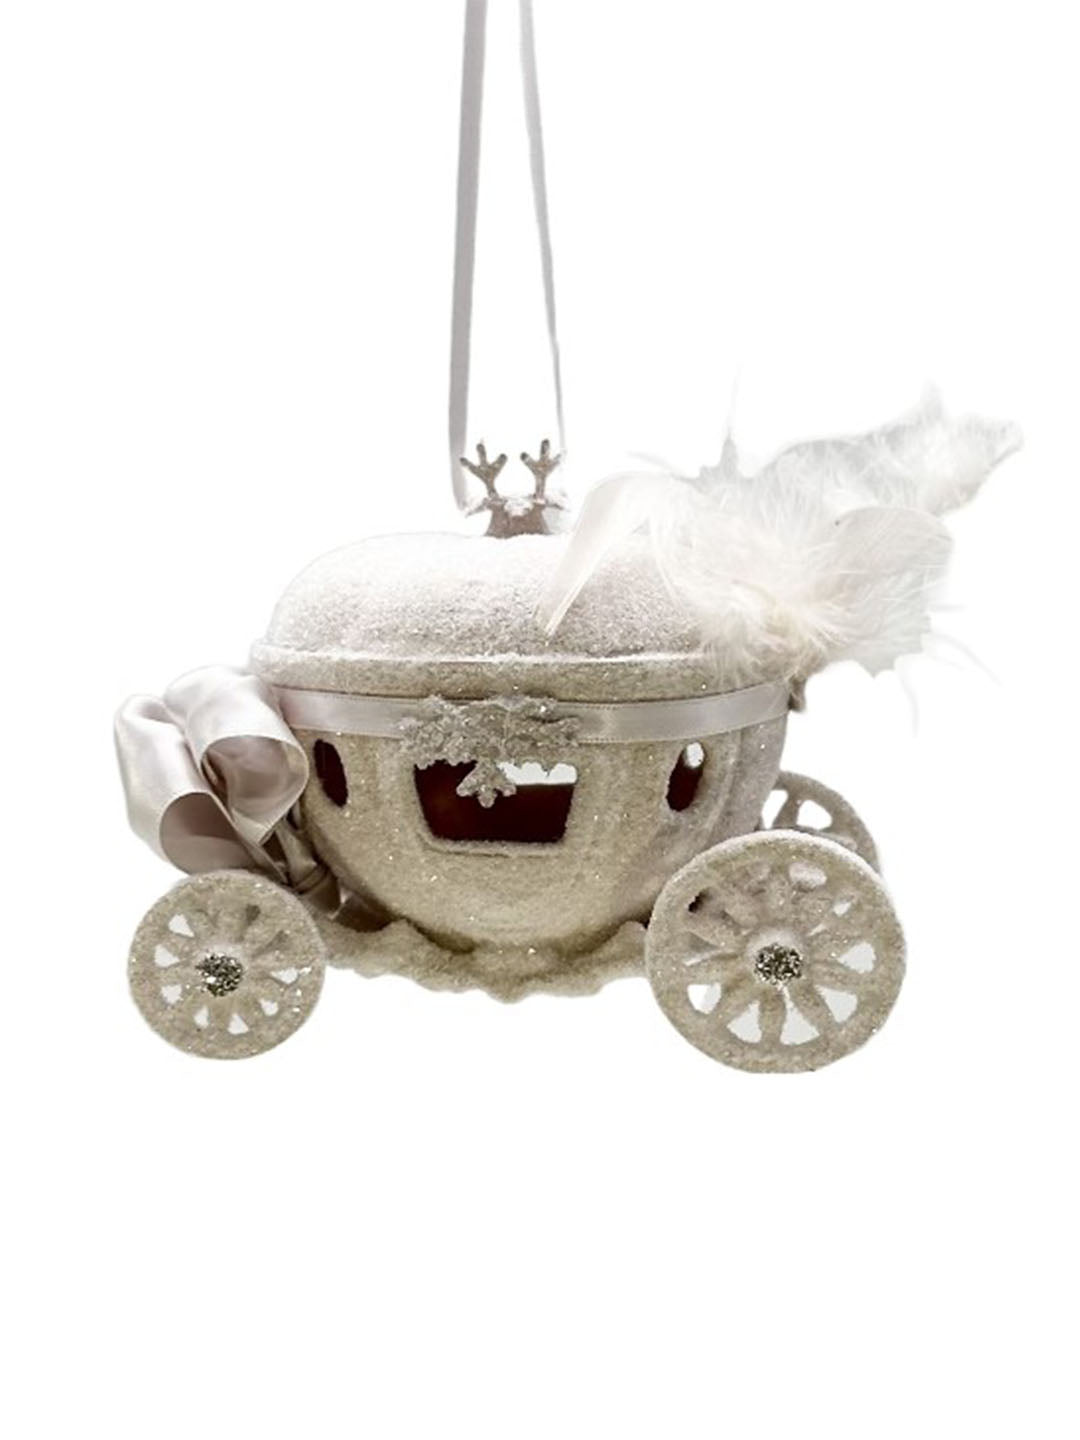 Carriage Ornament- Pink